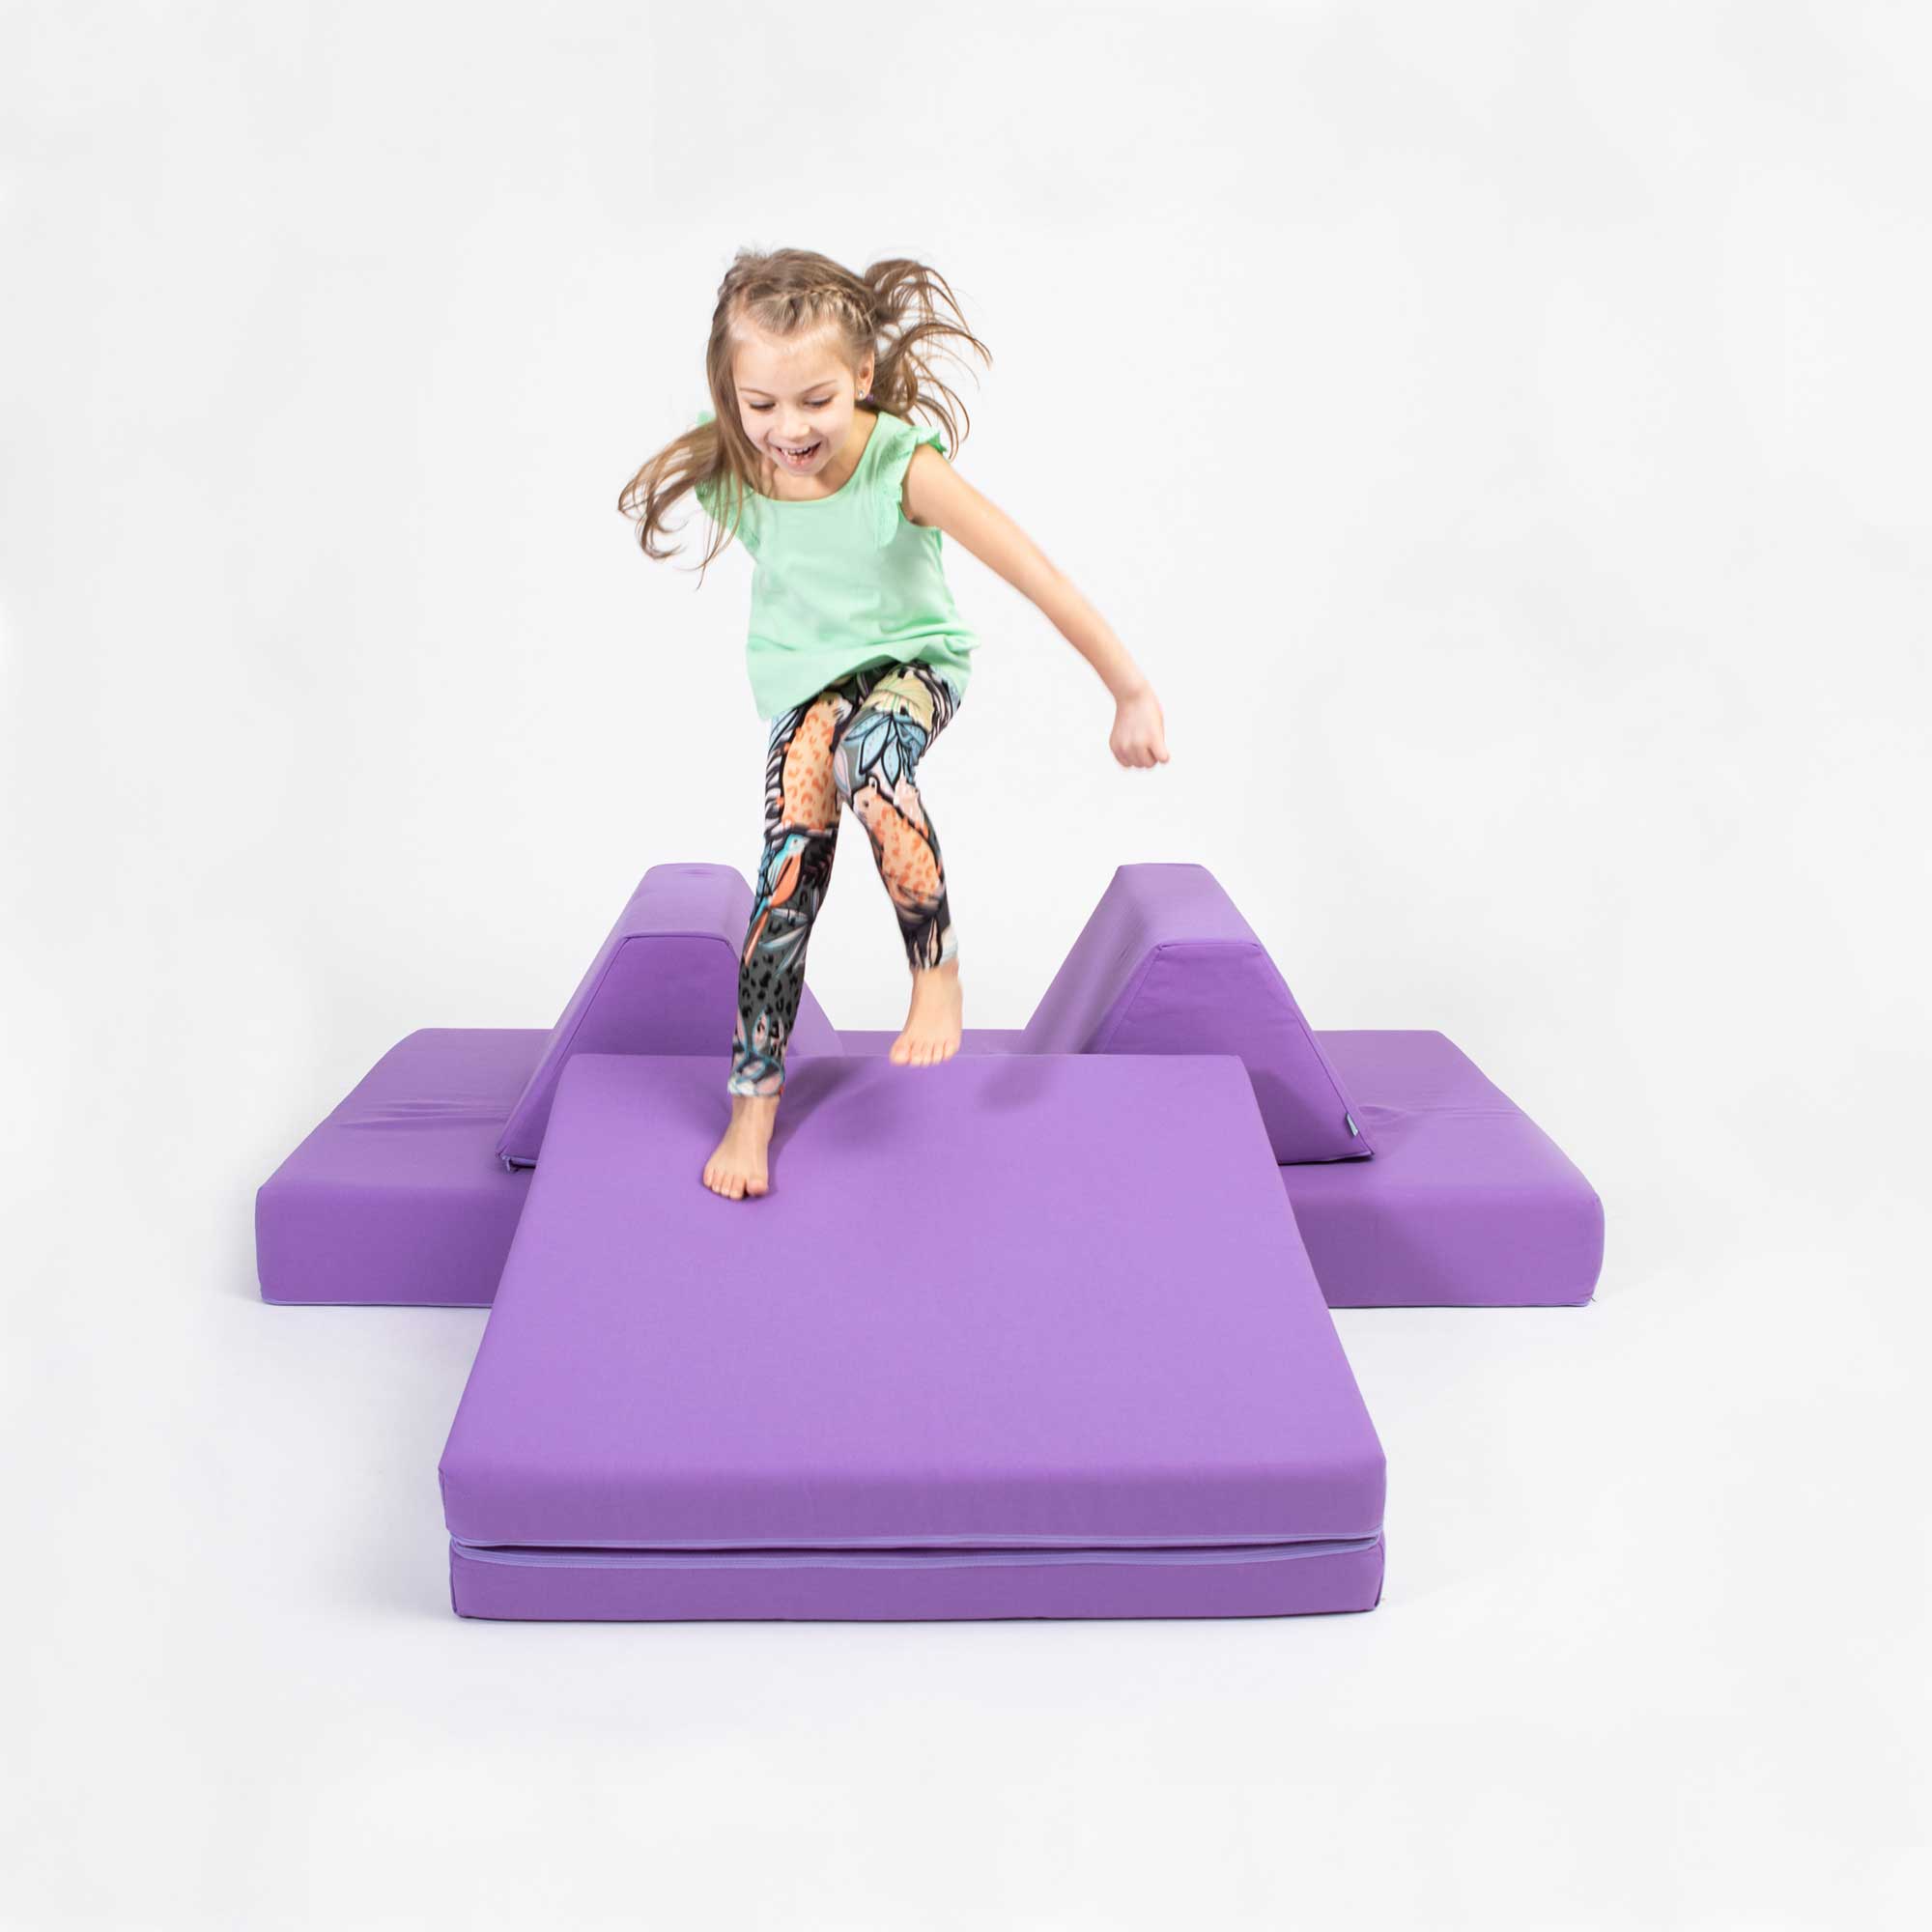 A girl jumping on her Purple Monboxy activity mat 